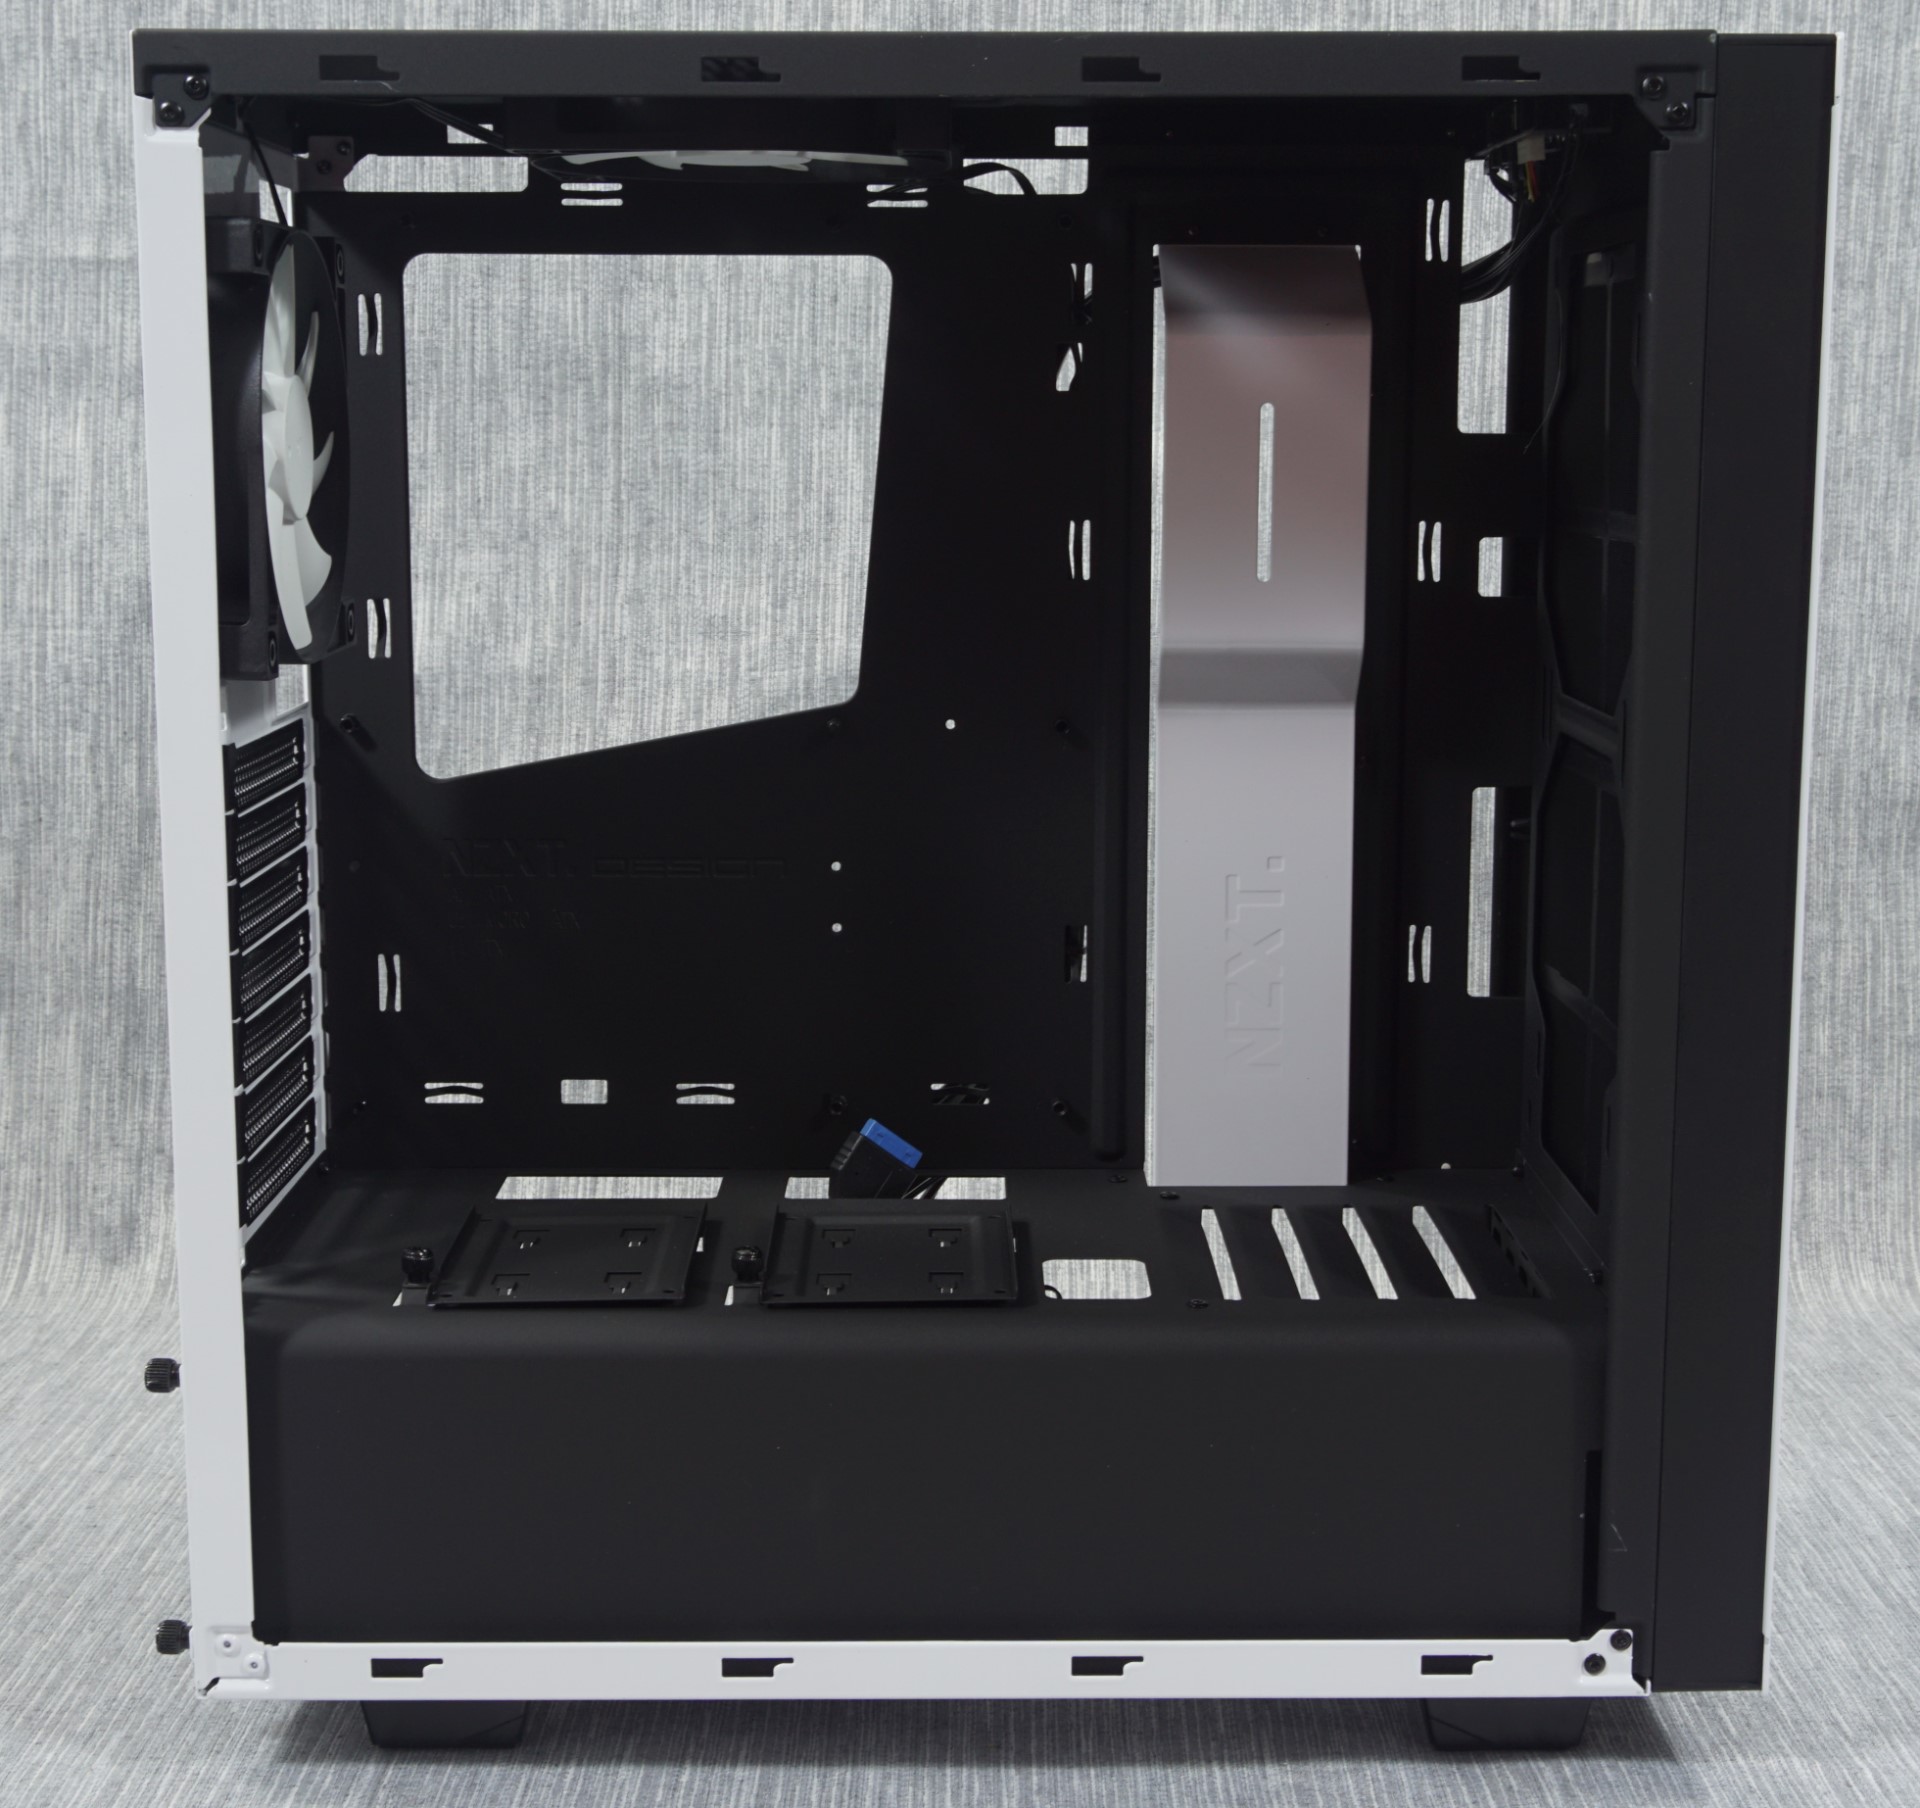 The Interior of the NZXT S340 - The NZXT S340 Case